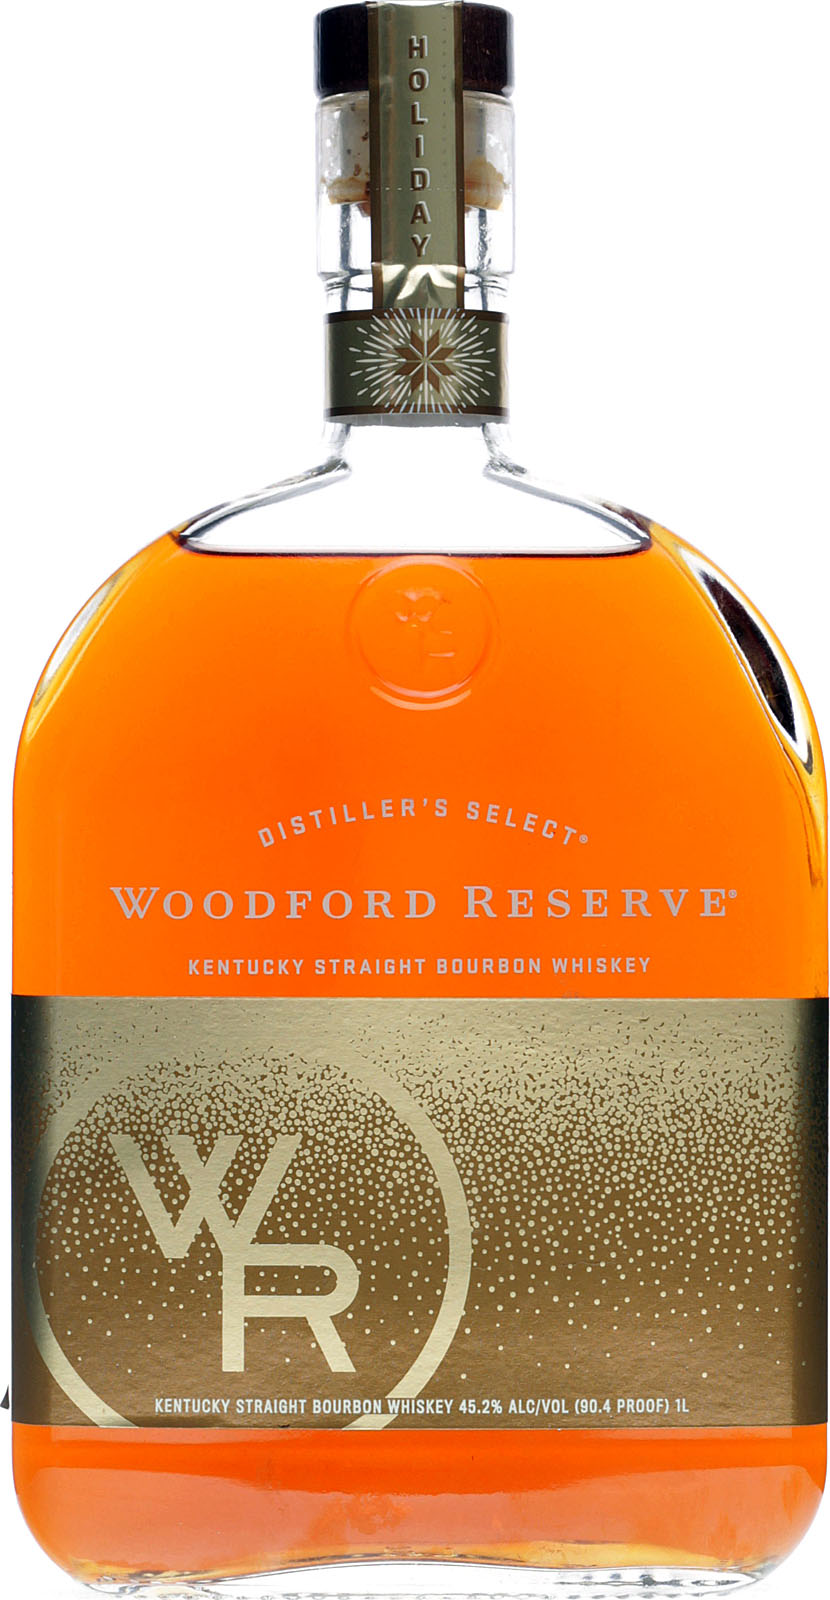 Woodford Reserve Holiday Edition hier im Shop kaufen.